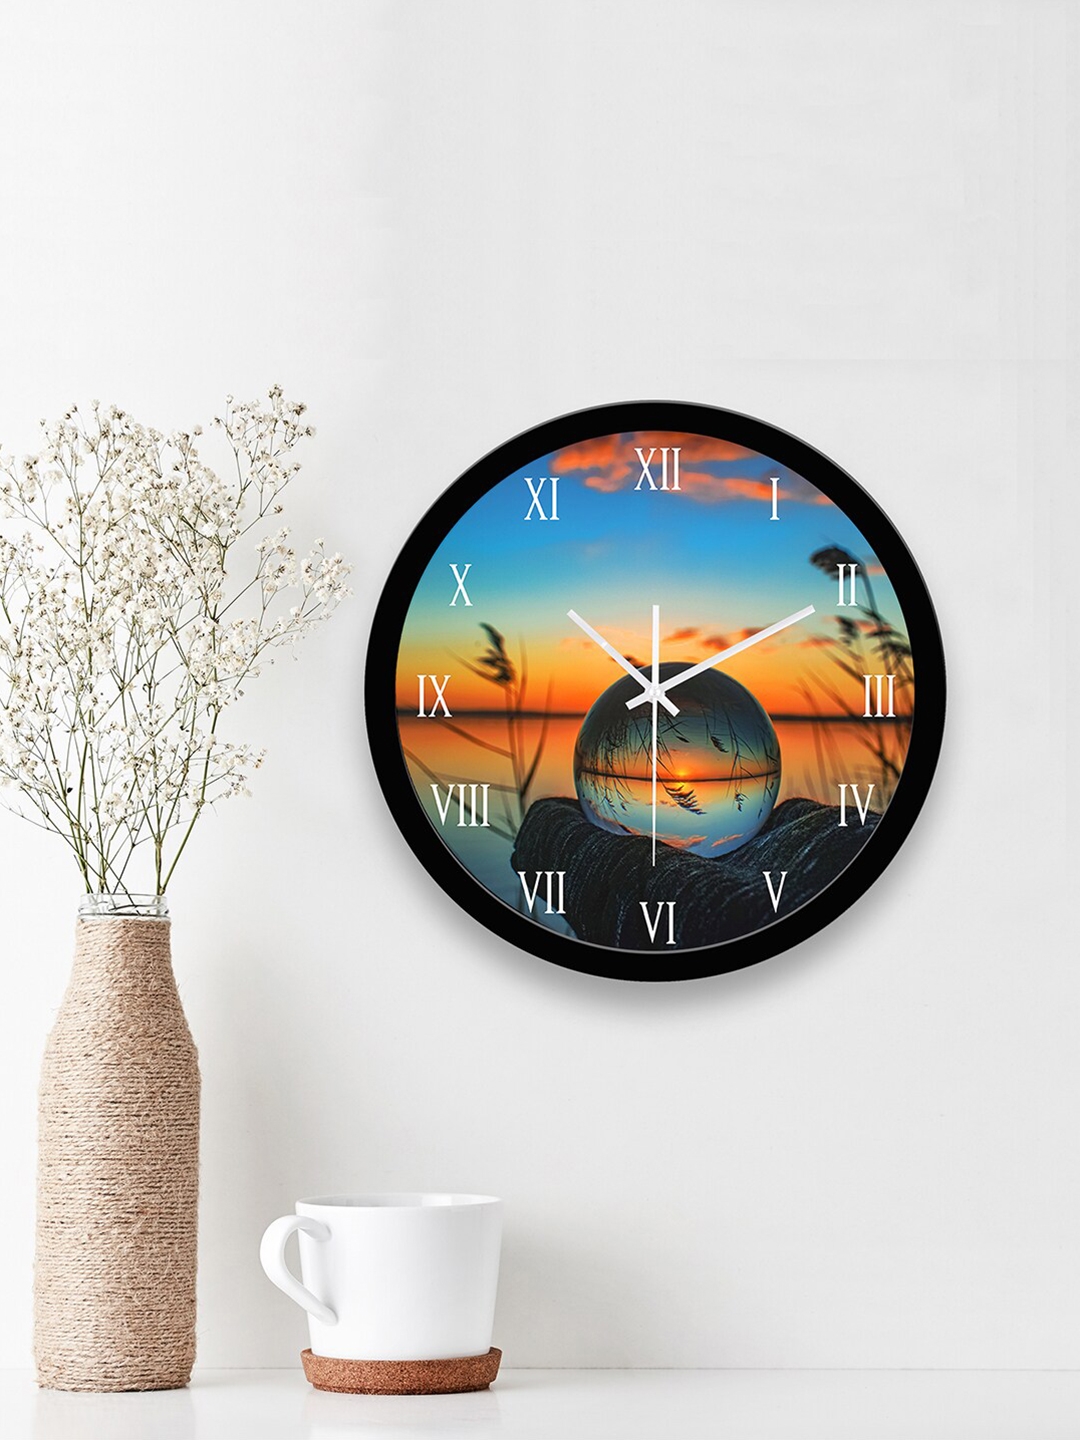 WENS Black Water Waves Printed Analogue Silent Non Ticking Battery Operated Wall Clock